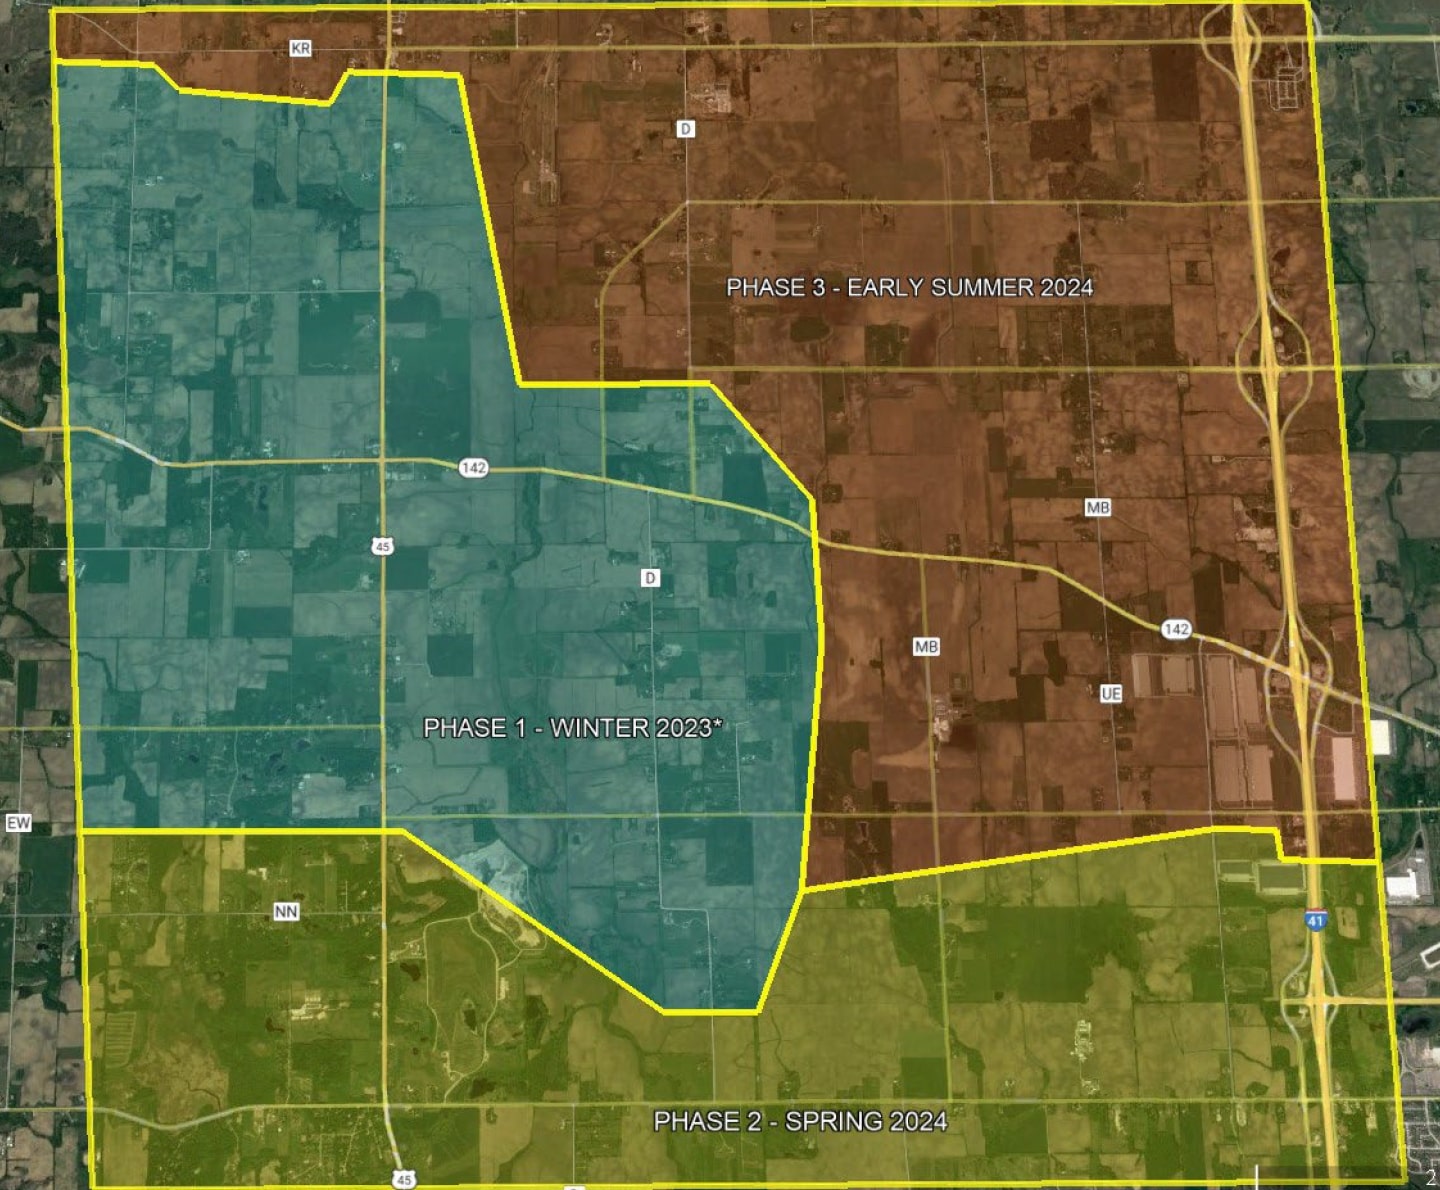 Midwest Fiber Network installation phases map showing Phase 1 in Winter 2023, Phase 2 in Spring 2024, and Phase 3 in Early Summer 2024